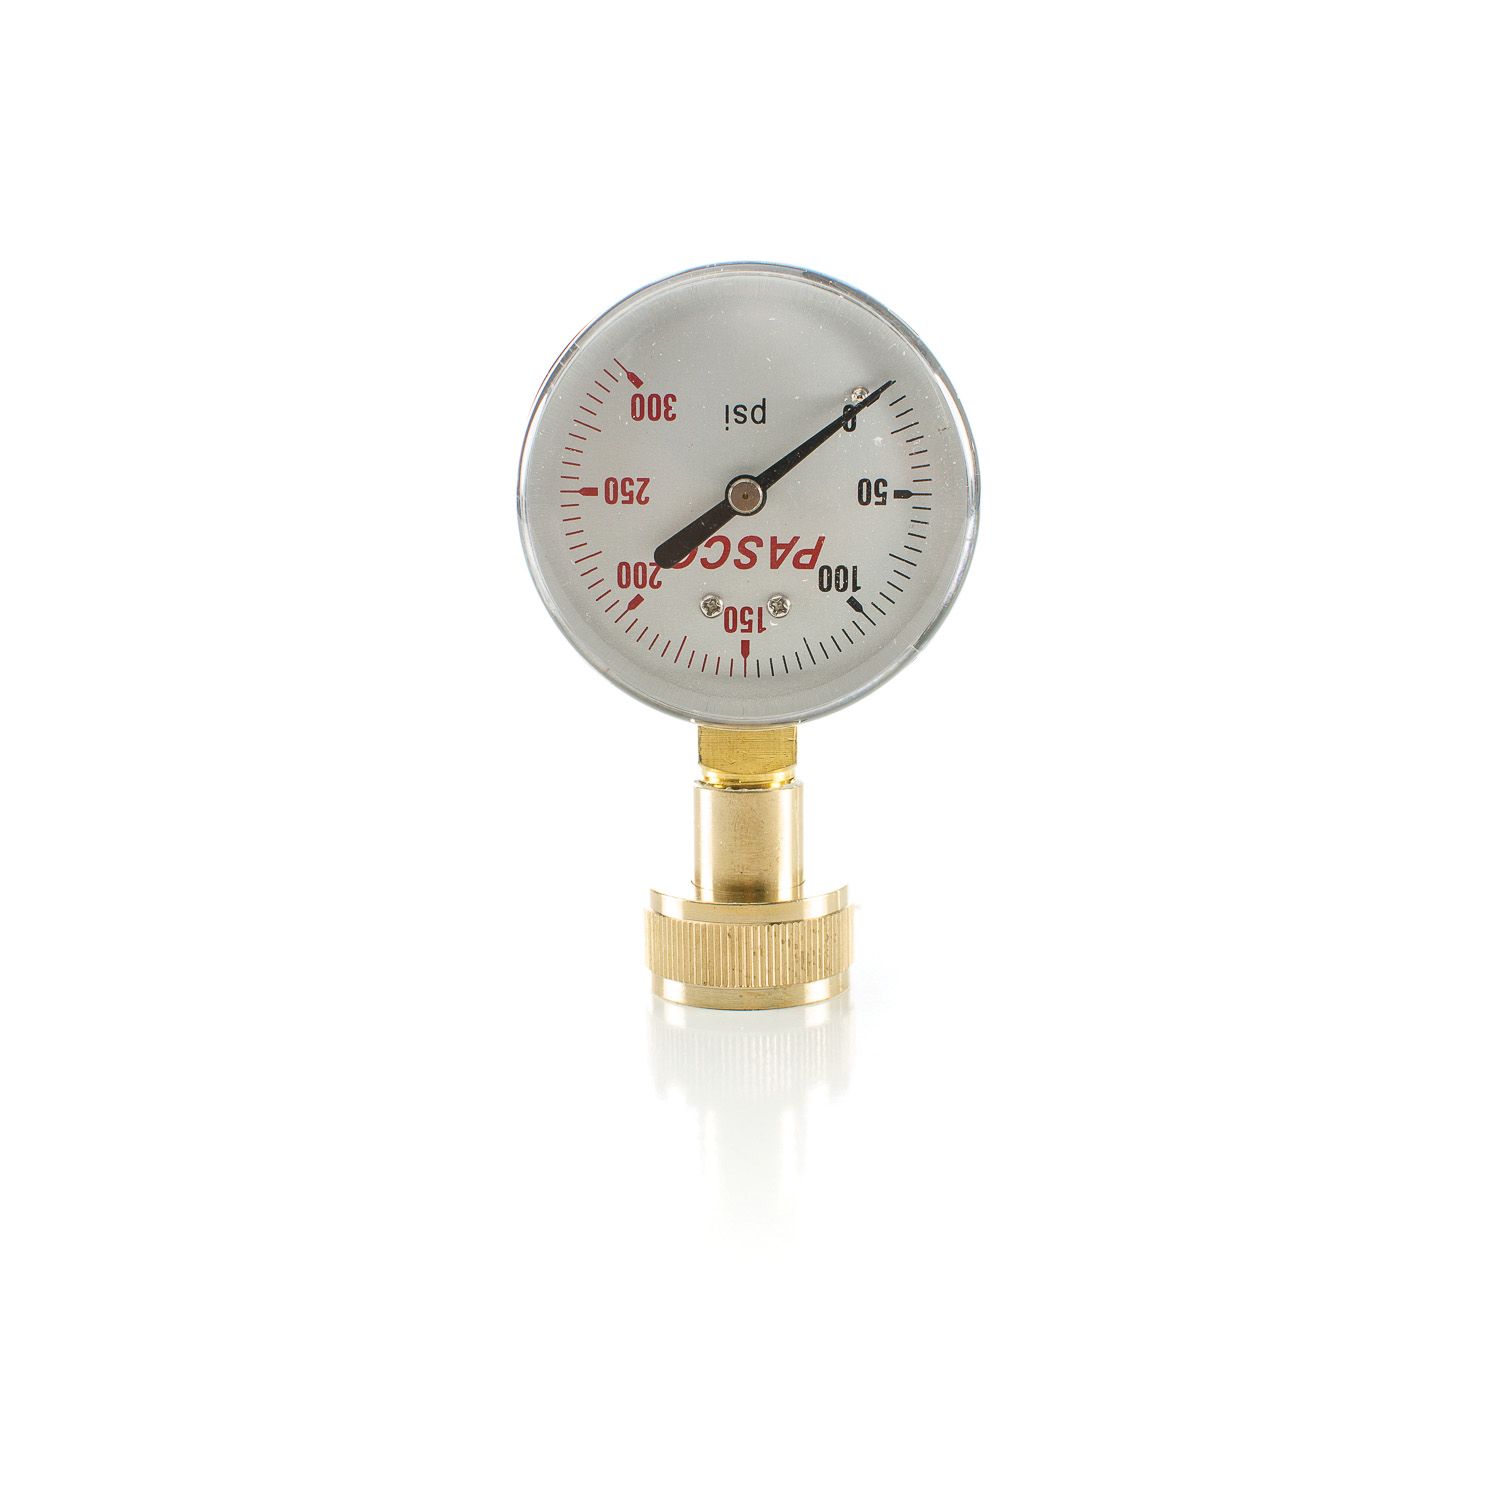 PASCO 1430 Water Test Gauge, 0 to 300 psi, 3/4 in Female Hose Thread Connection, 2-1/2 in Dial